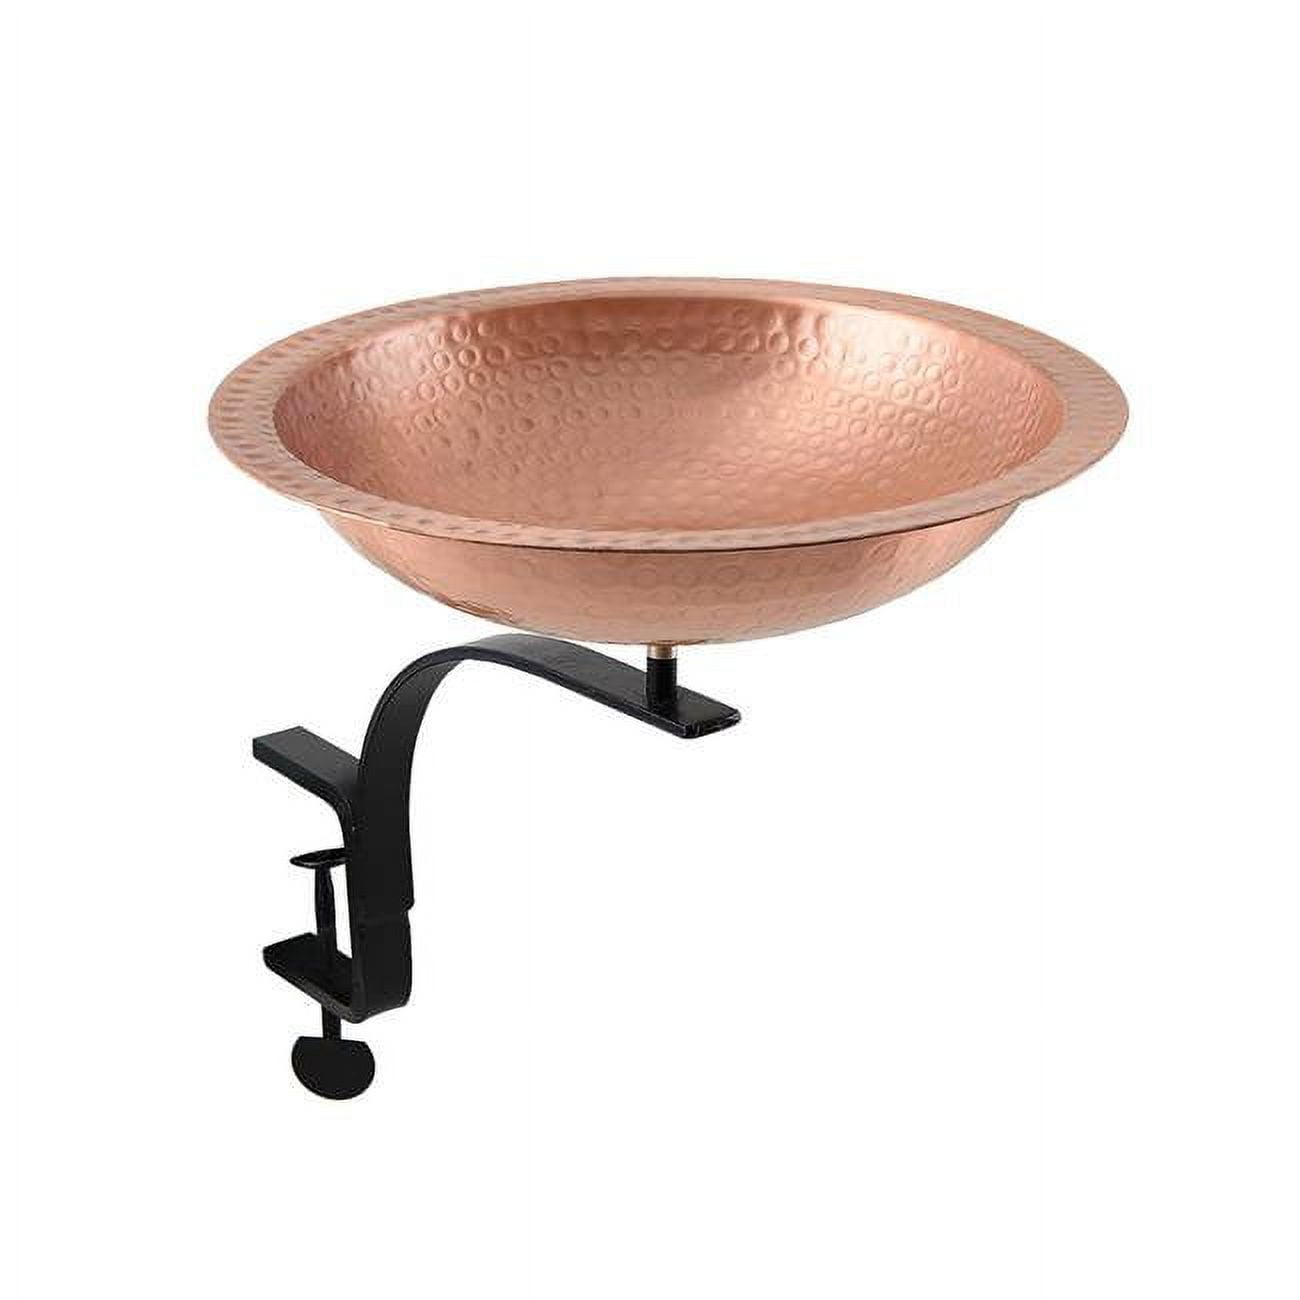 Picture of Achla BBHC-02T-RM Hammered Solid Copper Birdbath with Rail Mount Bracket, Natural Patina